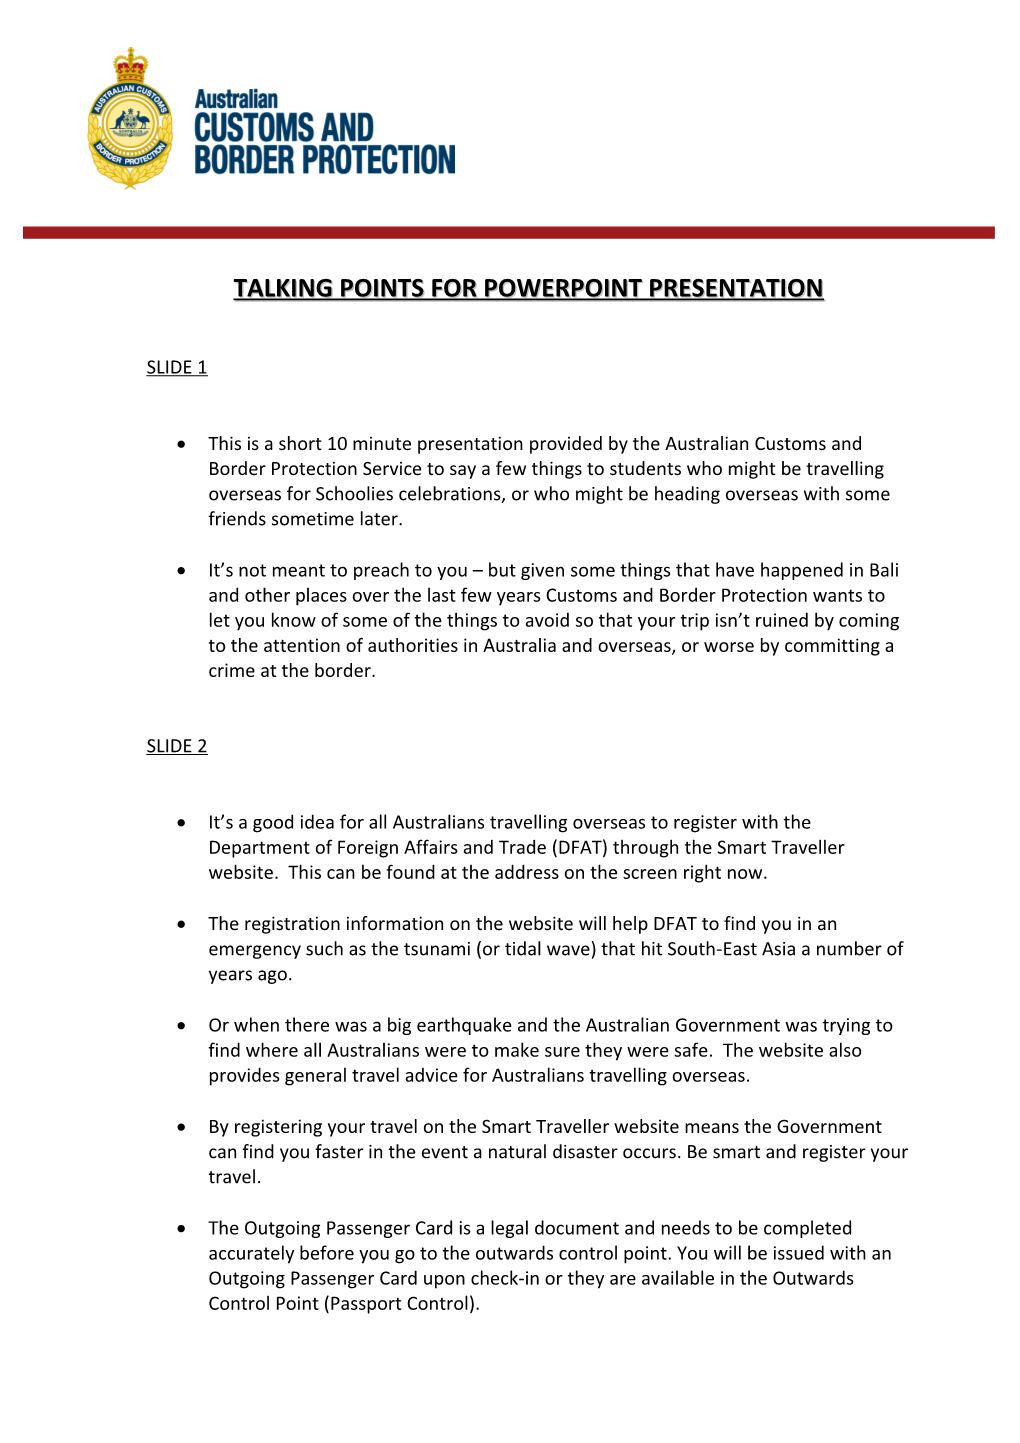 Talking Points for Powerpoint Presentation